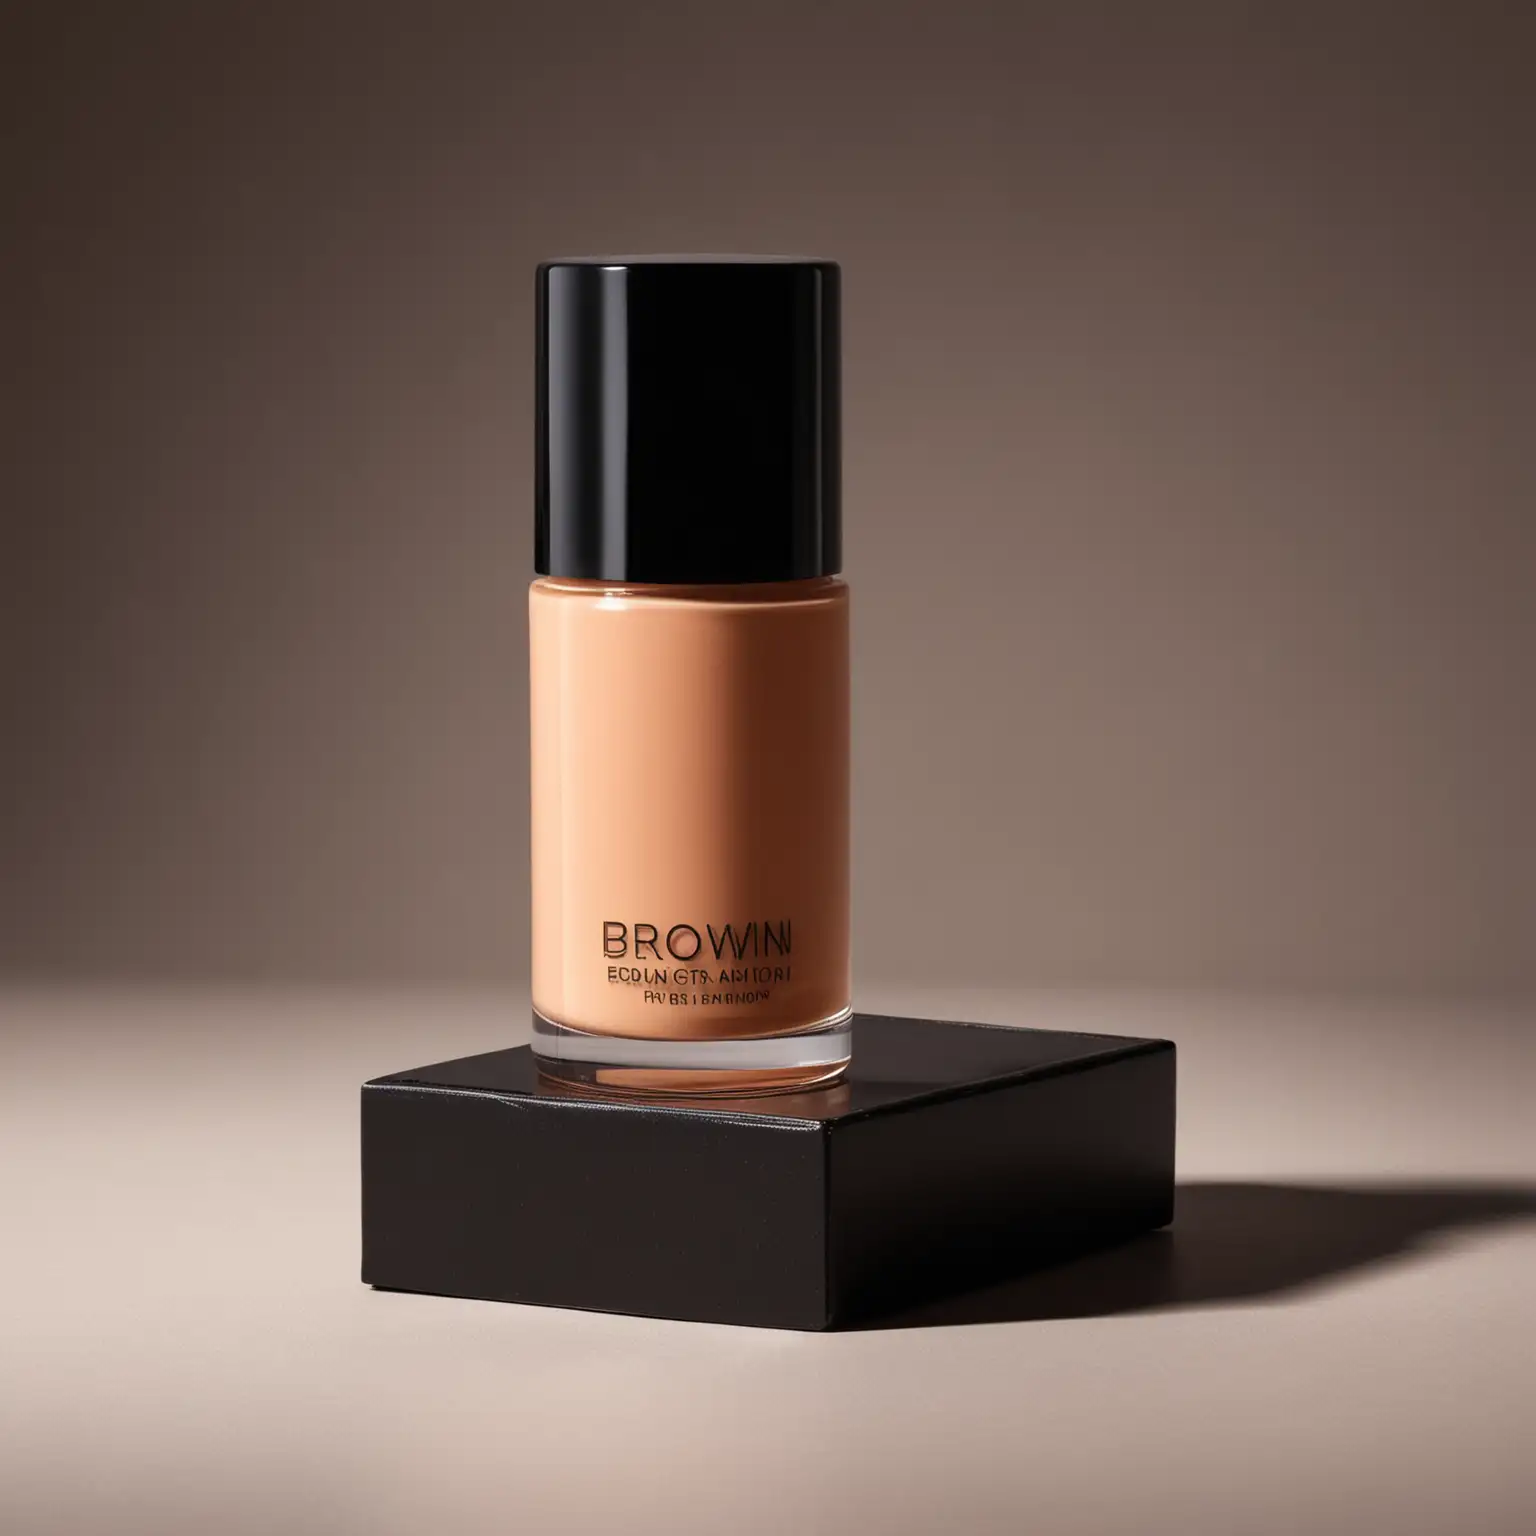 Makeup Photoshoot with Brown Foundation on Black Luxury Packaging